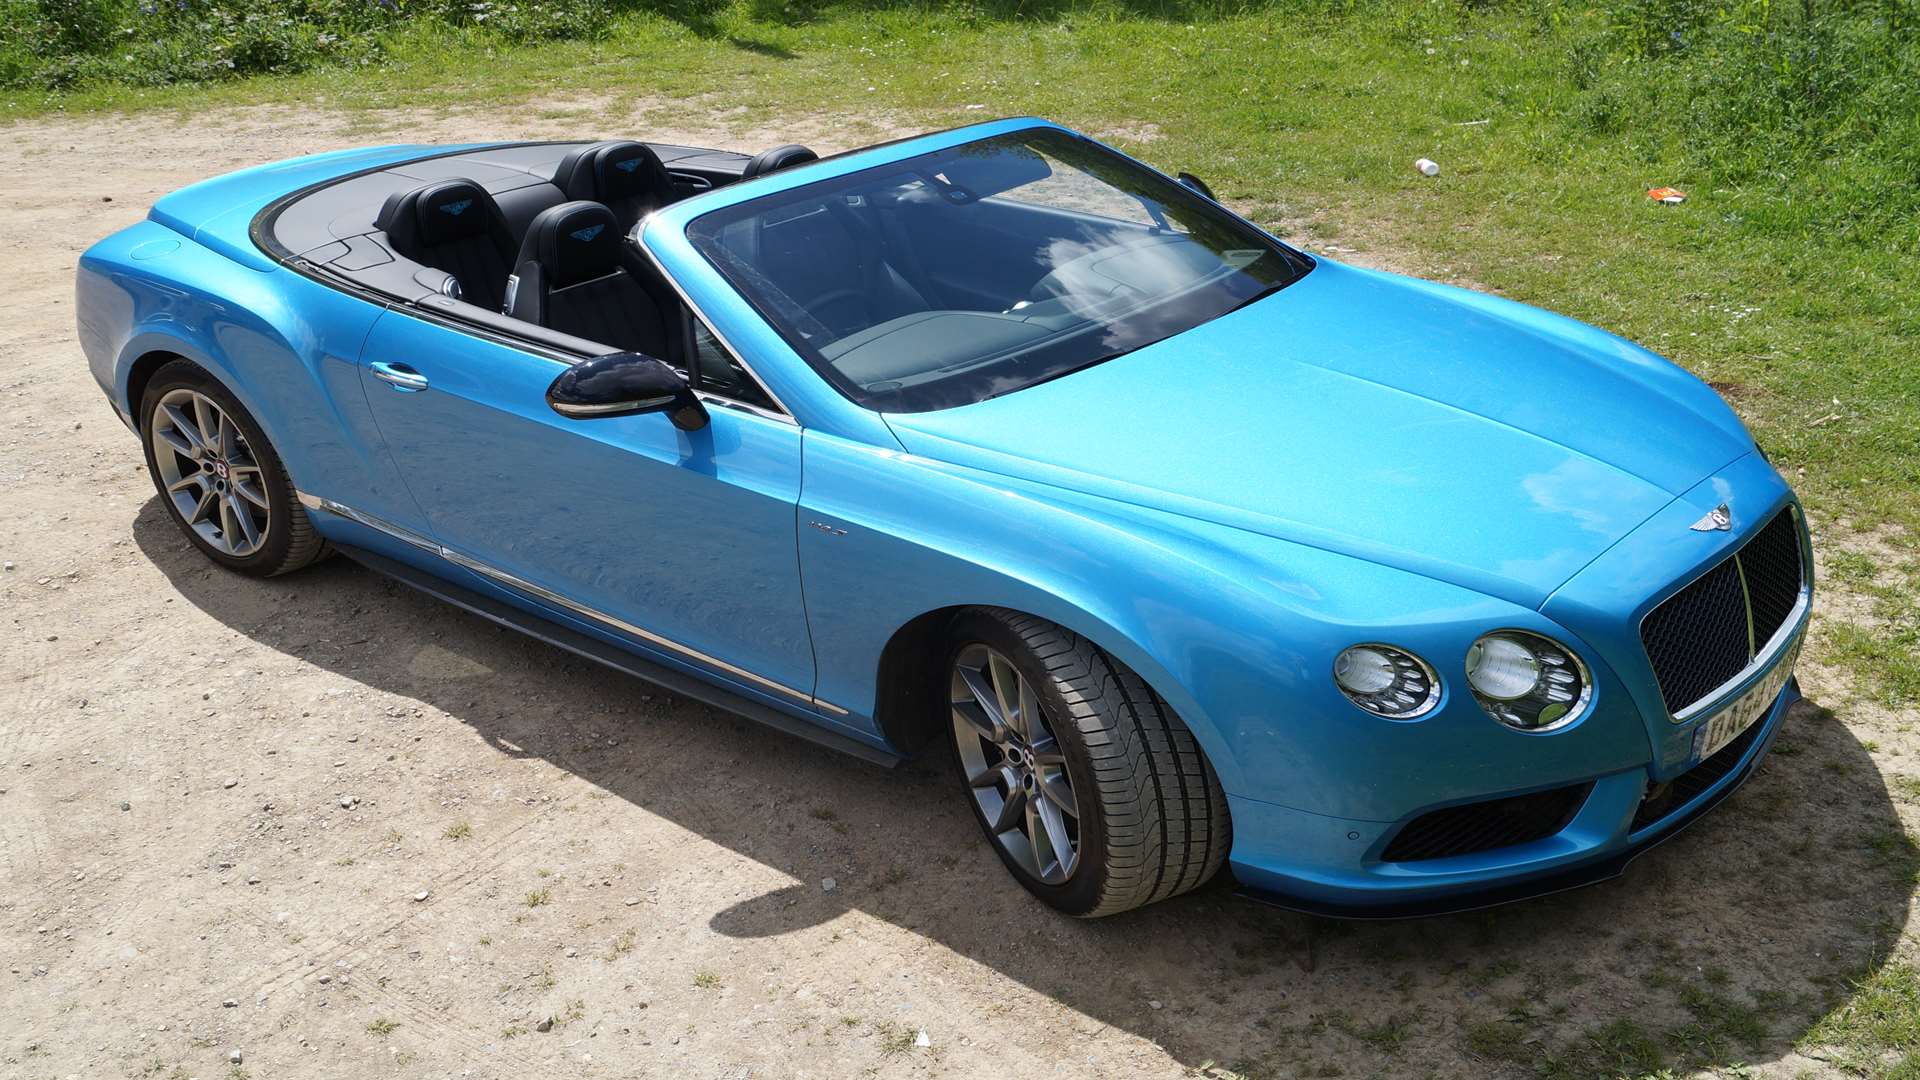 Don't like this colour? Bentley will paint your car any hue you choose